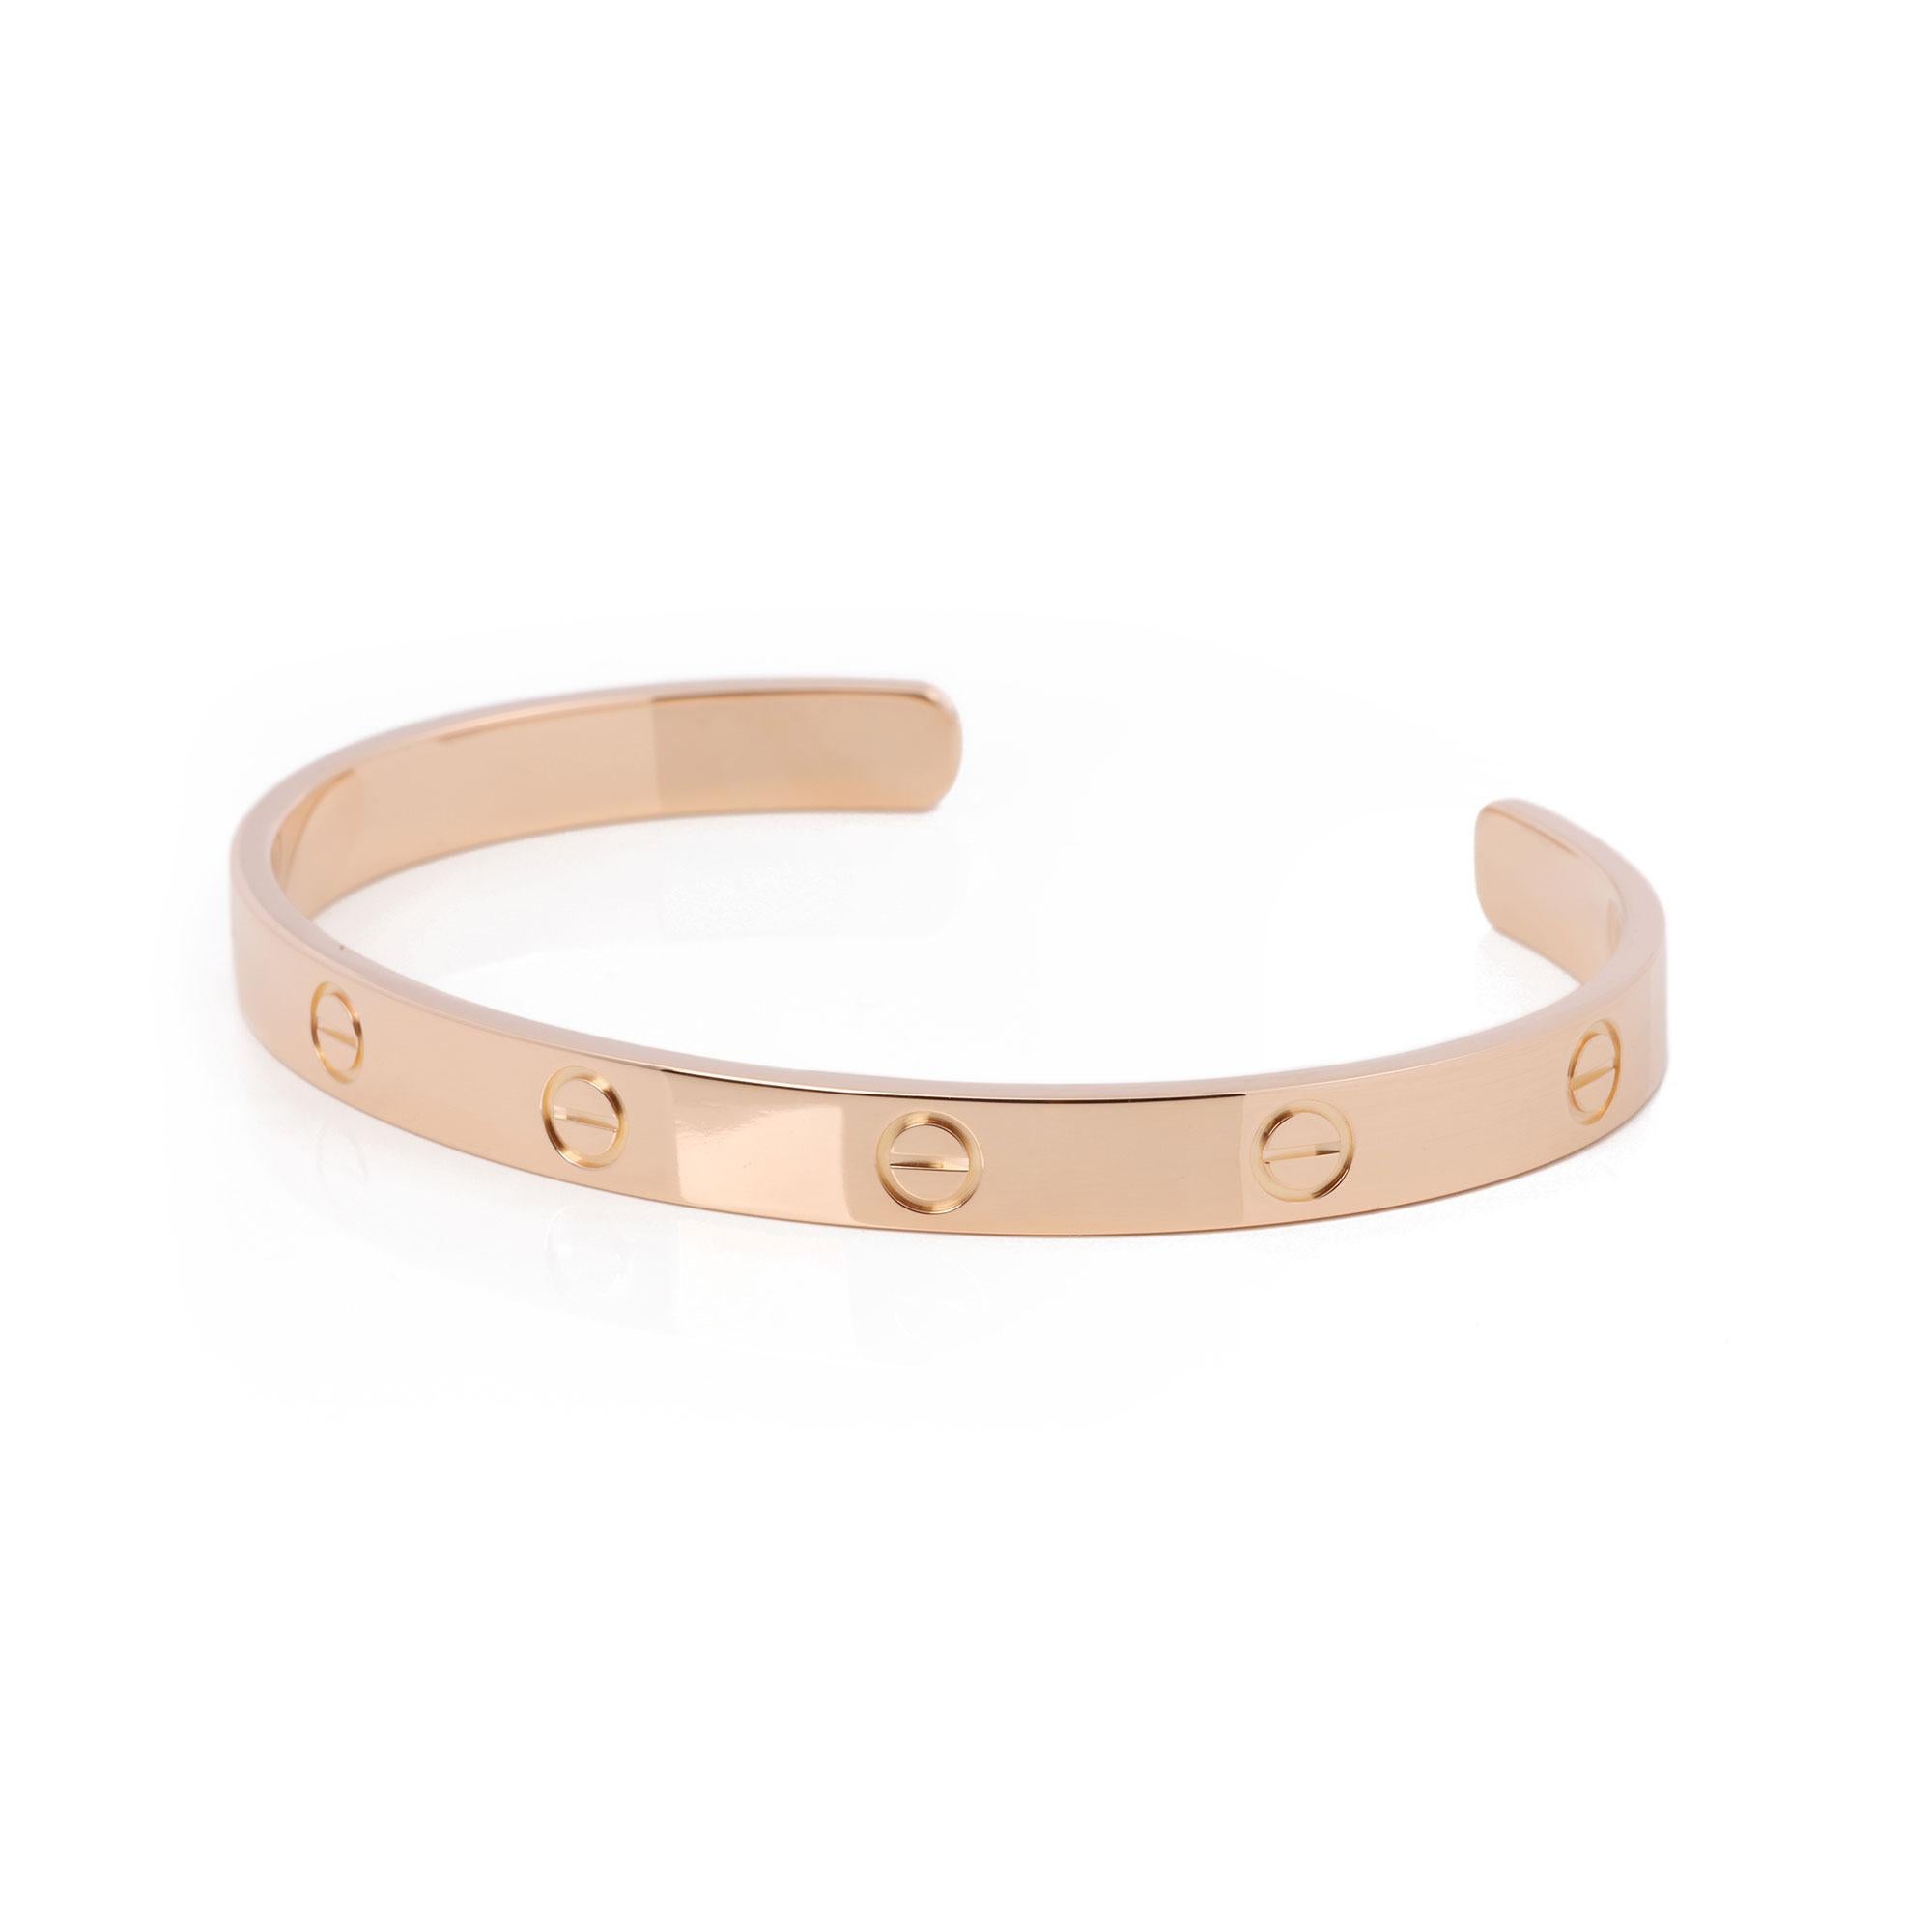 This cuff bangle by Cartier is from their Love collection and is made in 18ct rose gold. Accompanied with a Cartier pouch. Our Xupes reference is J577 should you need to quote this. 